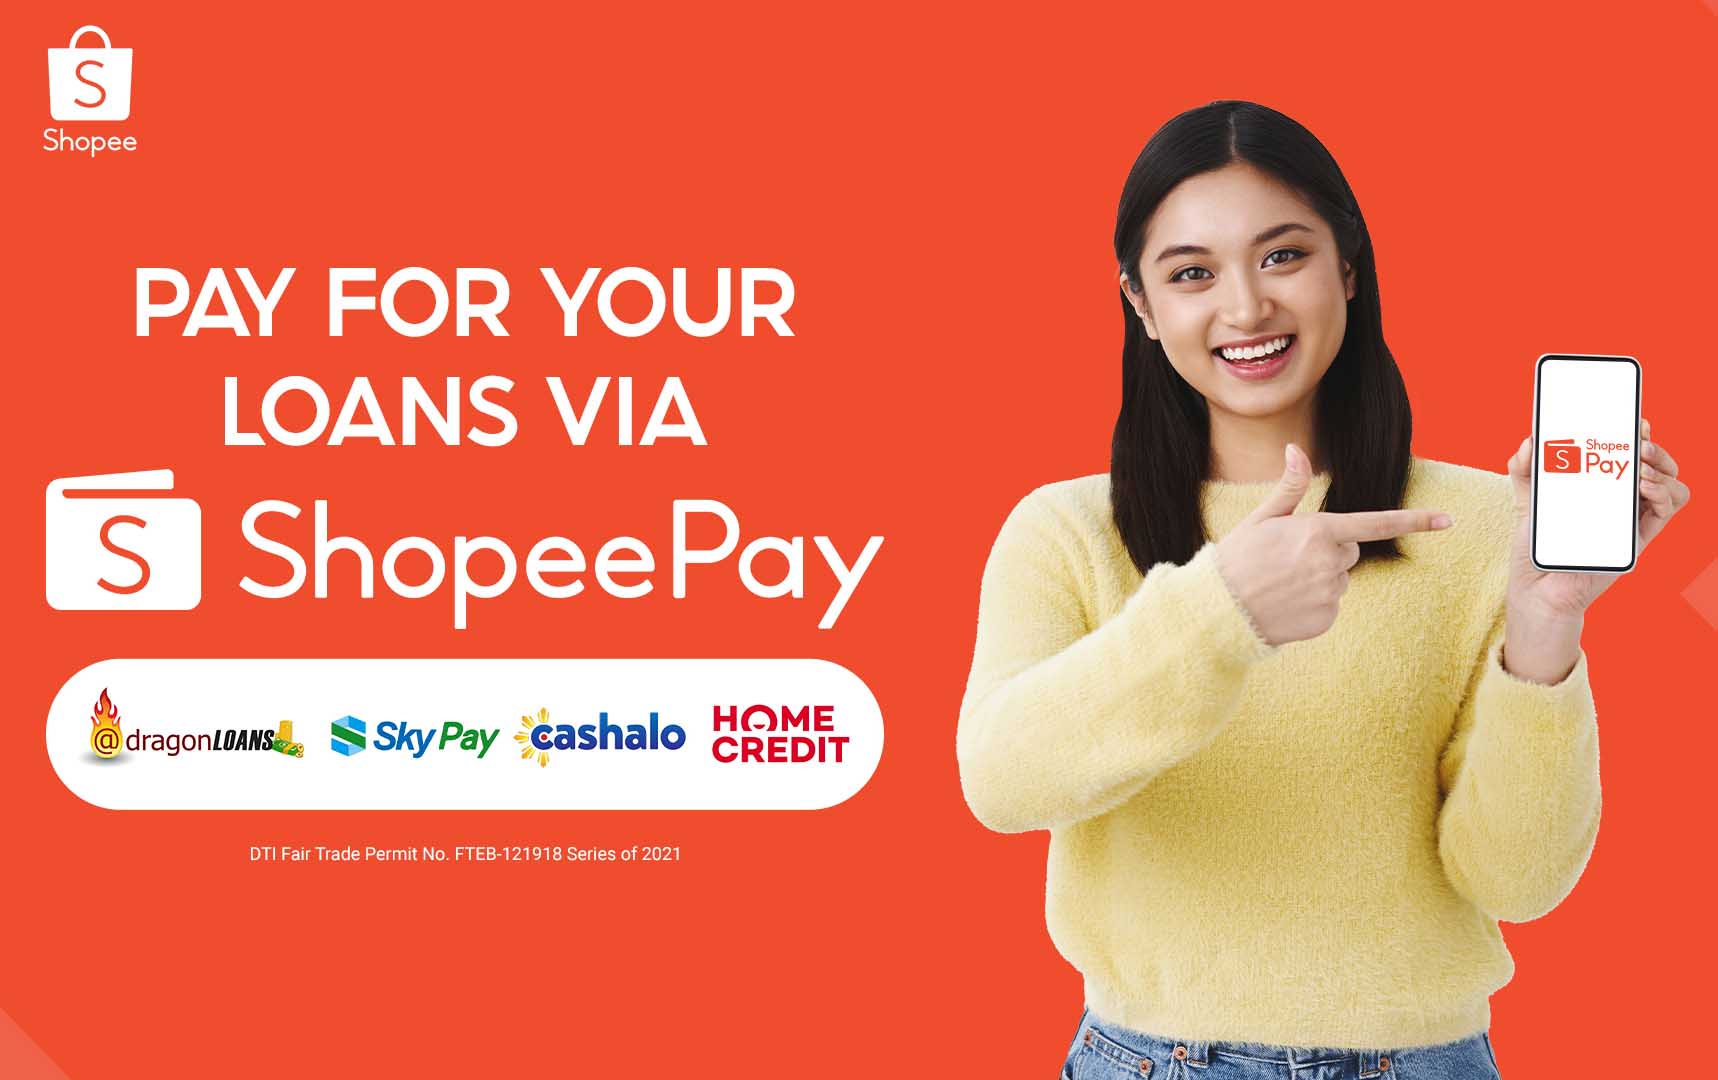 You Can Now Pay for Your Loans via ShopeePay